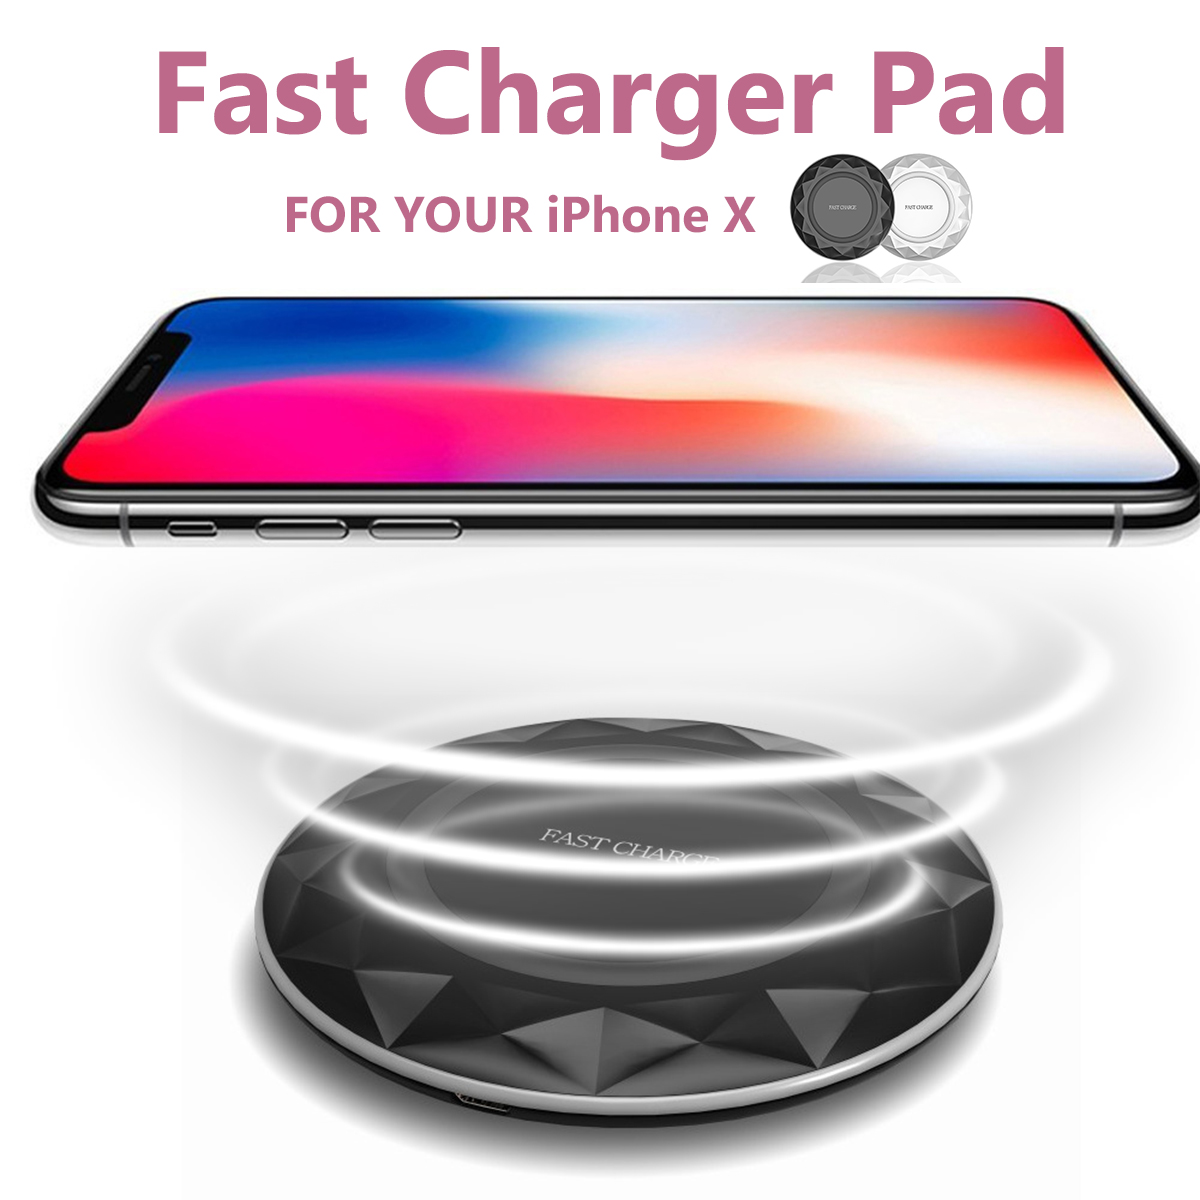 Wireless-Qi-Fast-Charger-Thin-Charging-Pad-For-iPhone-88P-iPhone-X-Samsung-S8-1237344-1